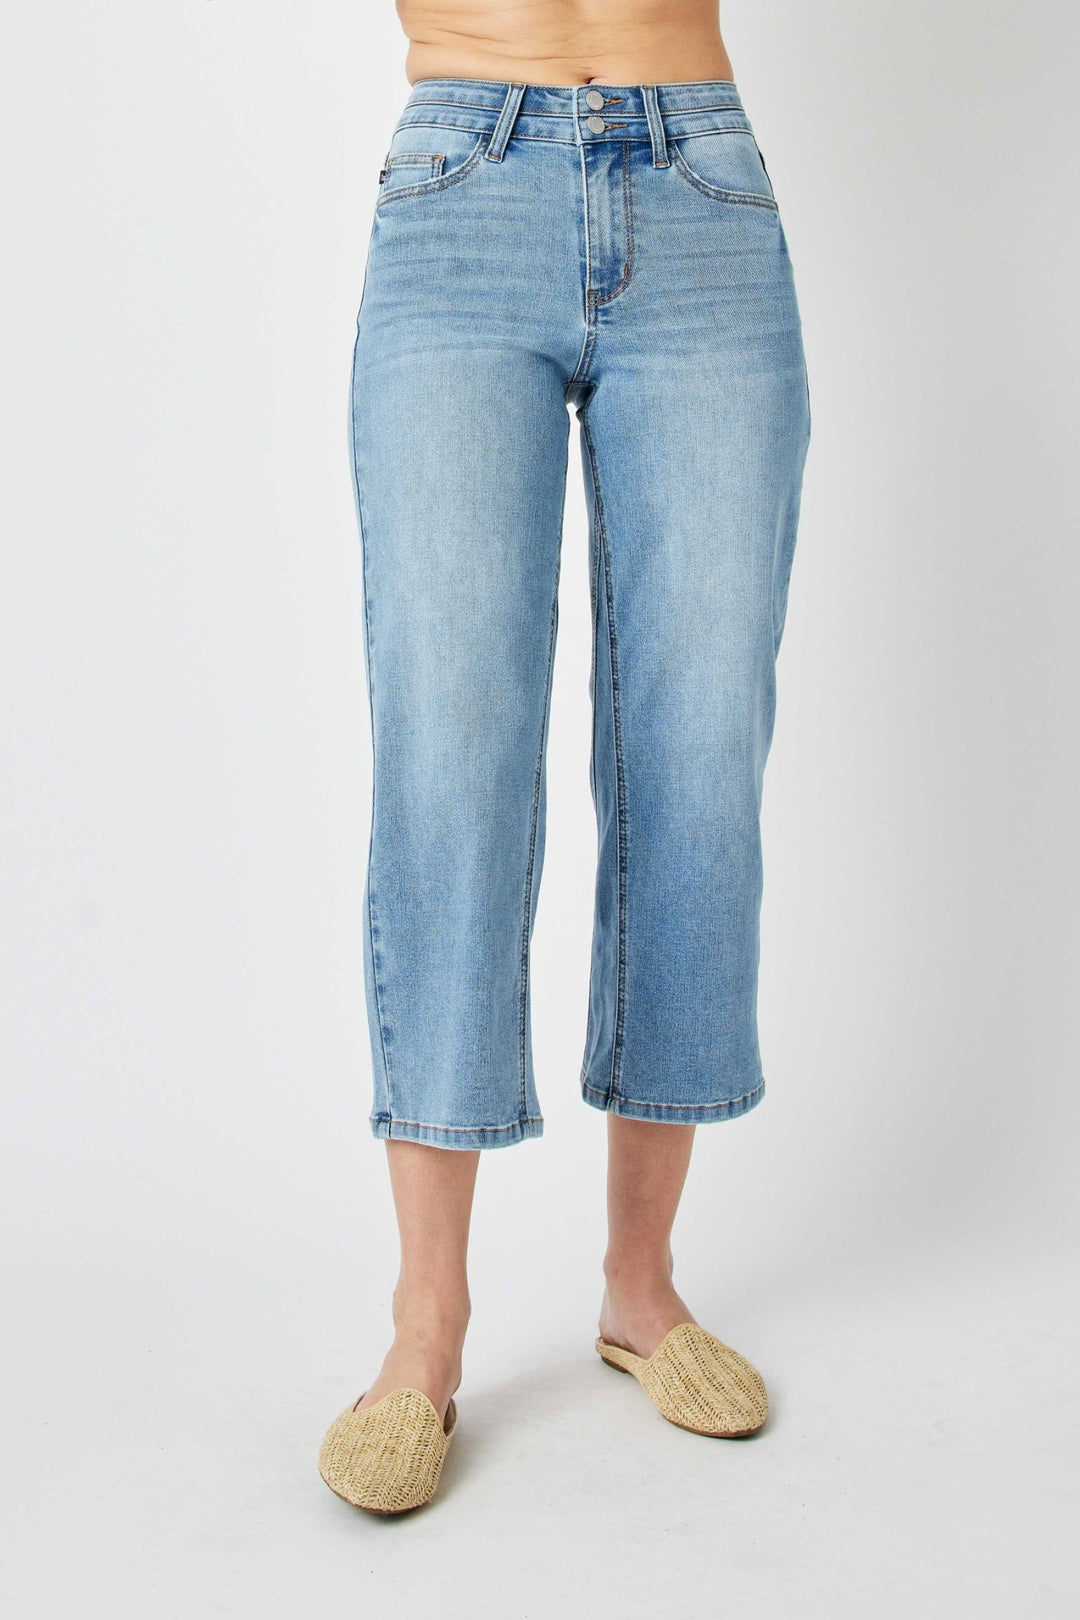 Judy Blue High Waist Cropped Wide Leg Jeans-Jeans-Judy Blue-Evergreen Boutique, Women’s Fashion Boutique in Santa Claus, Indiana